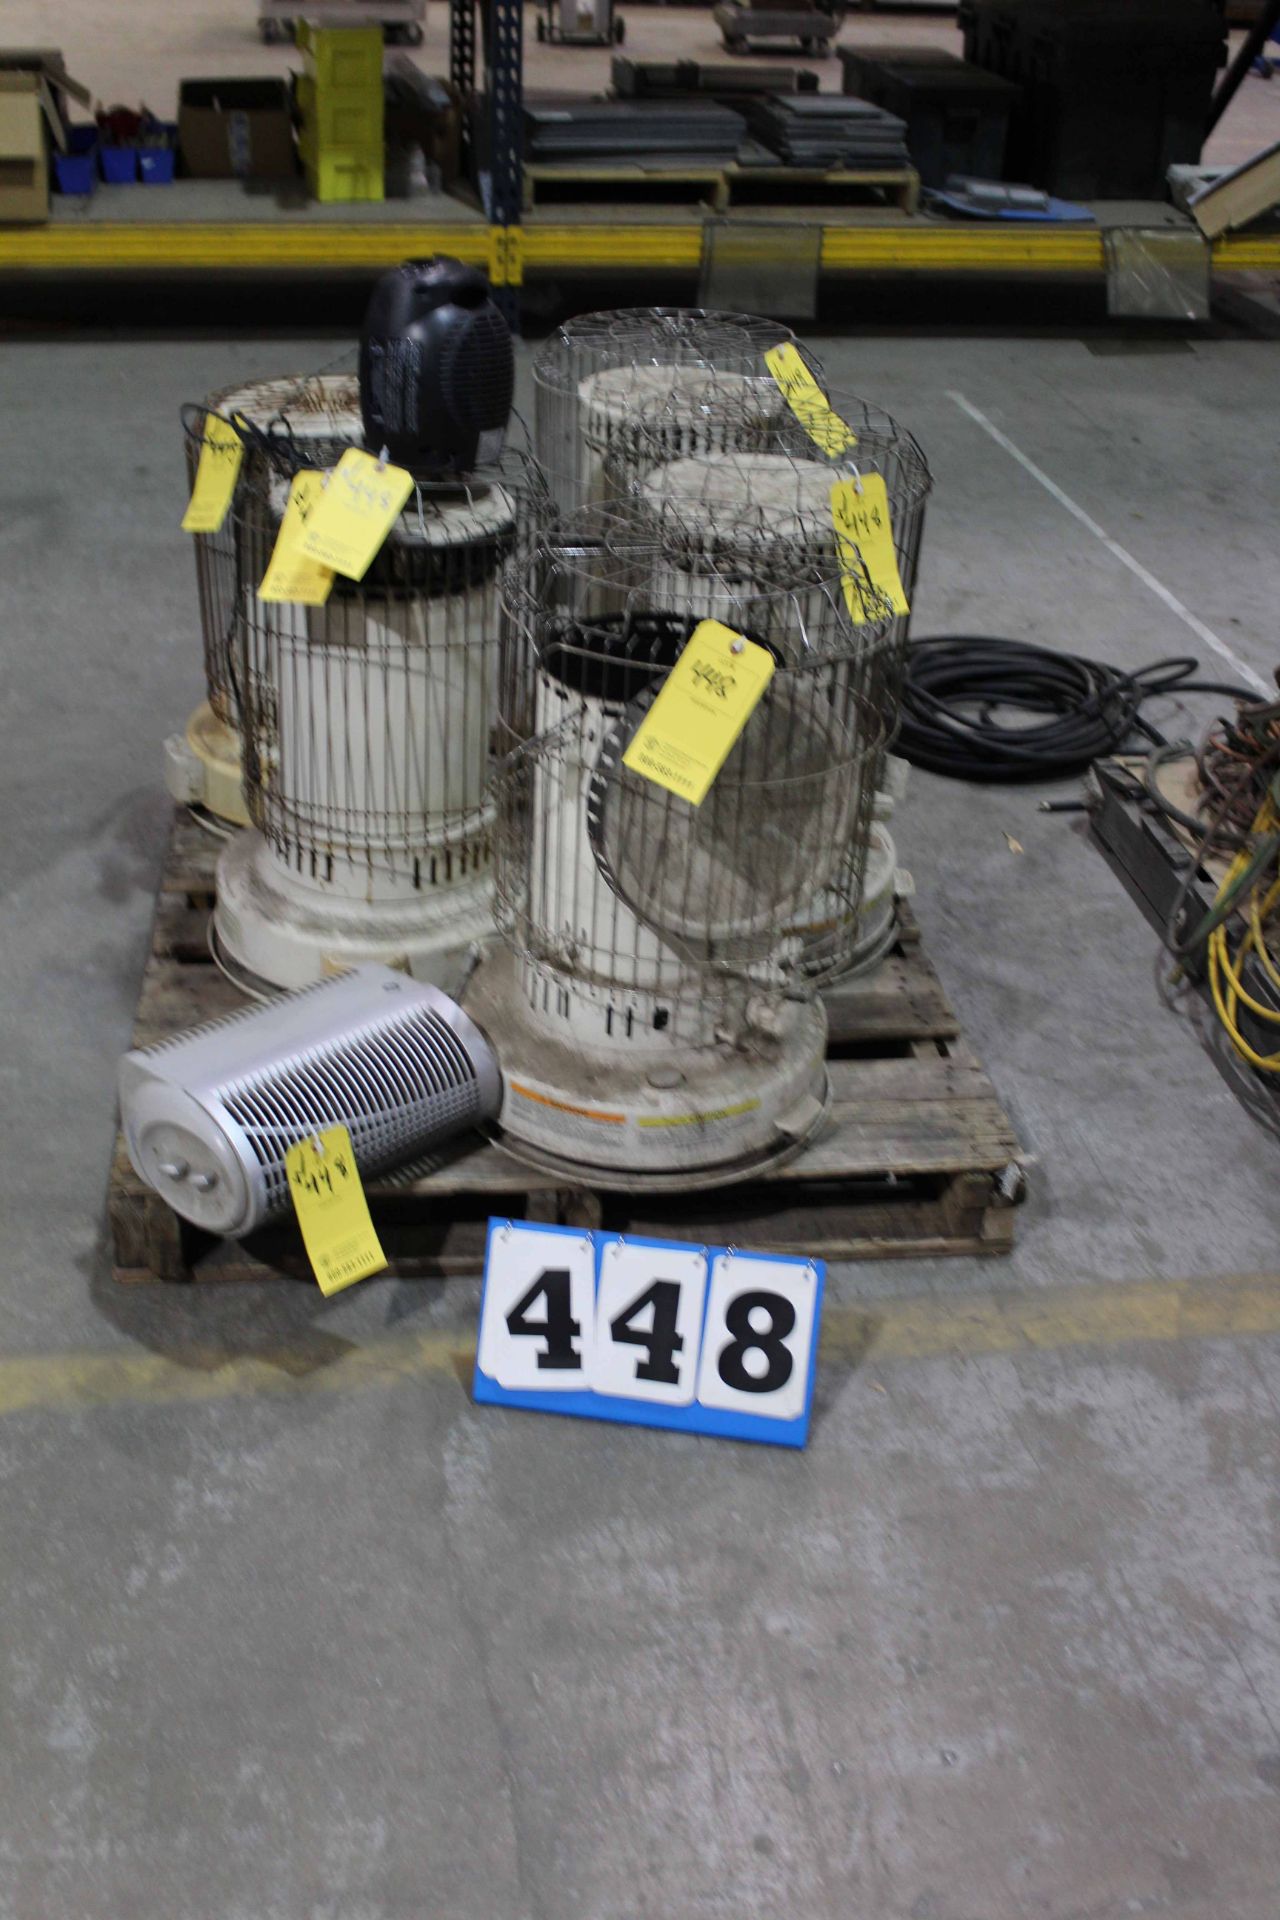 LOT OF HEATERS, assorted (on one pallet)